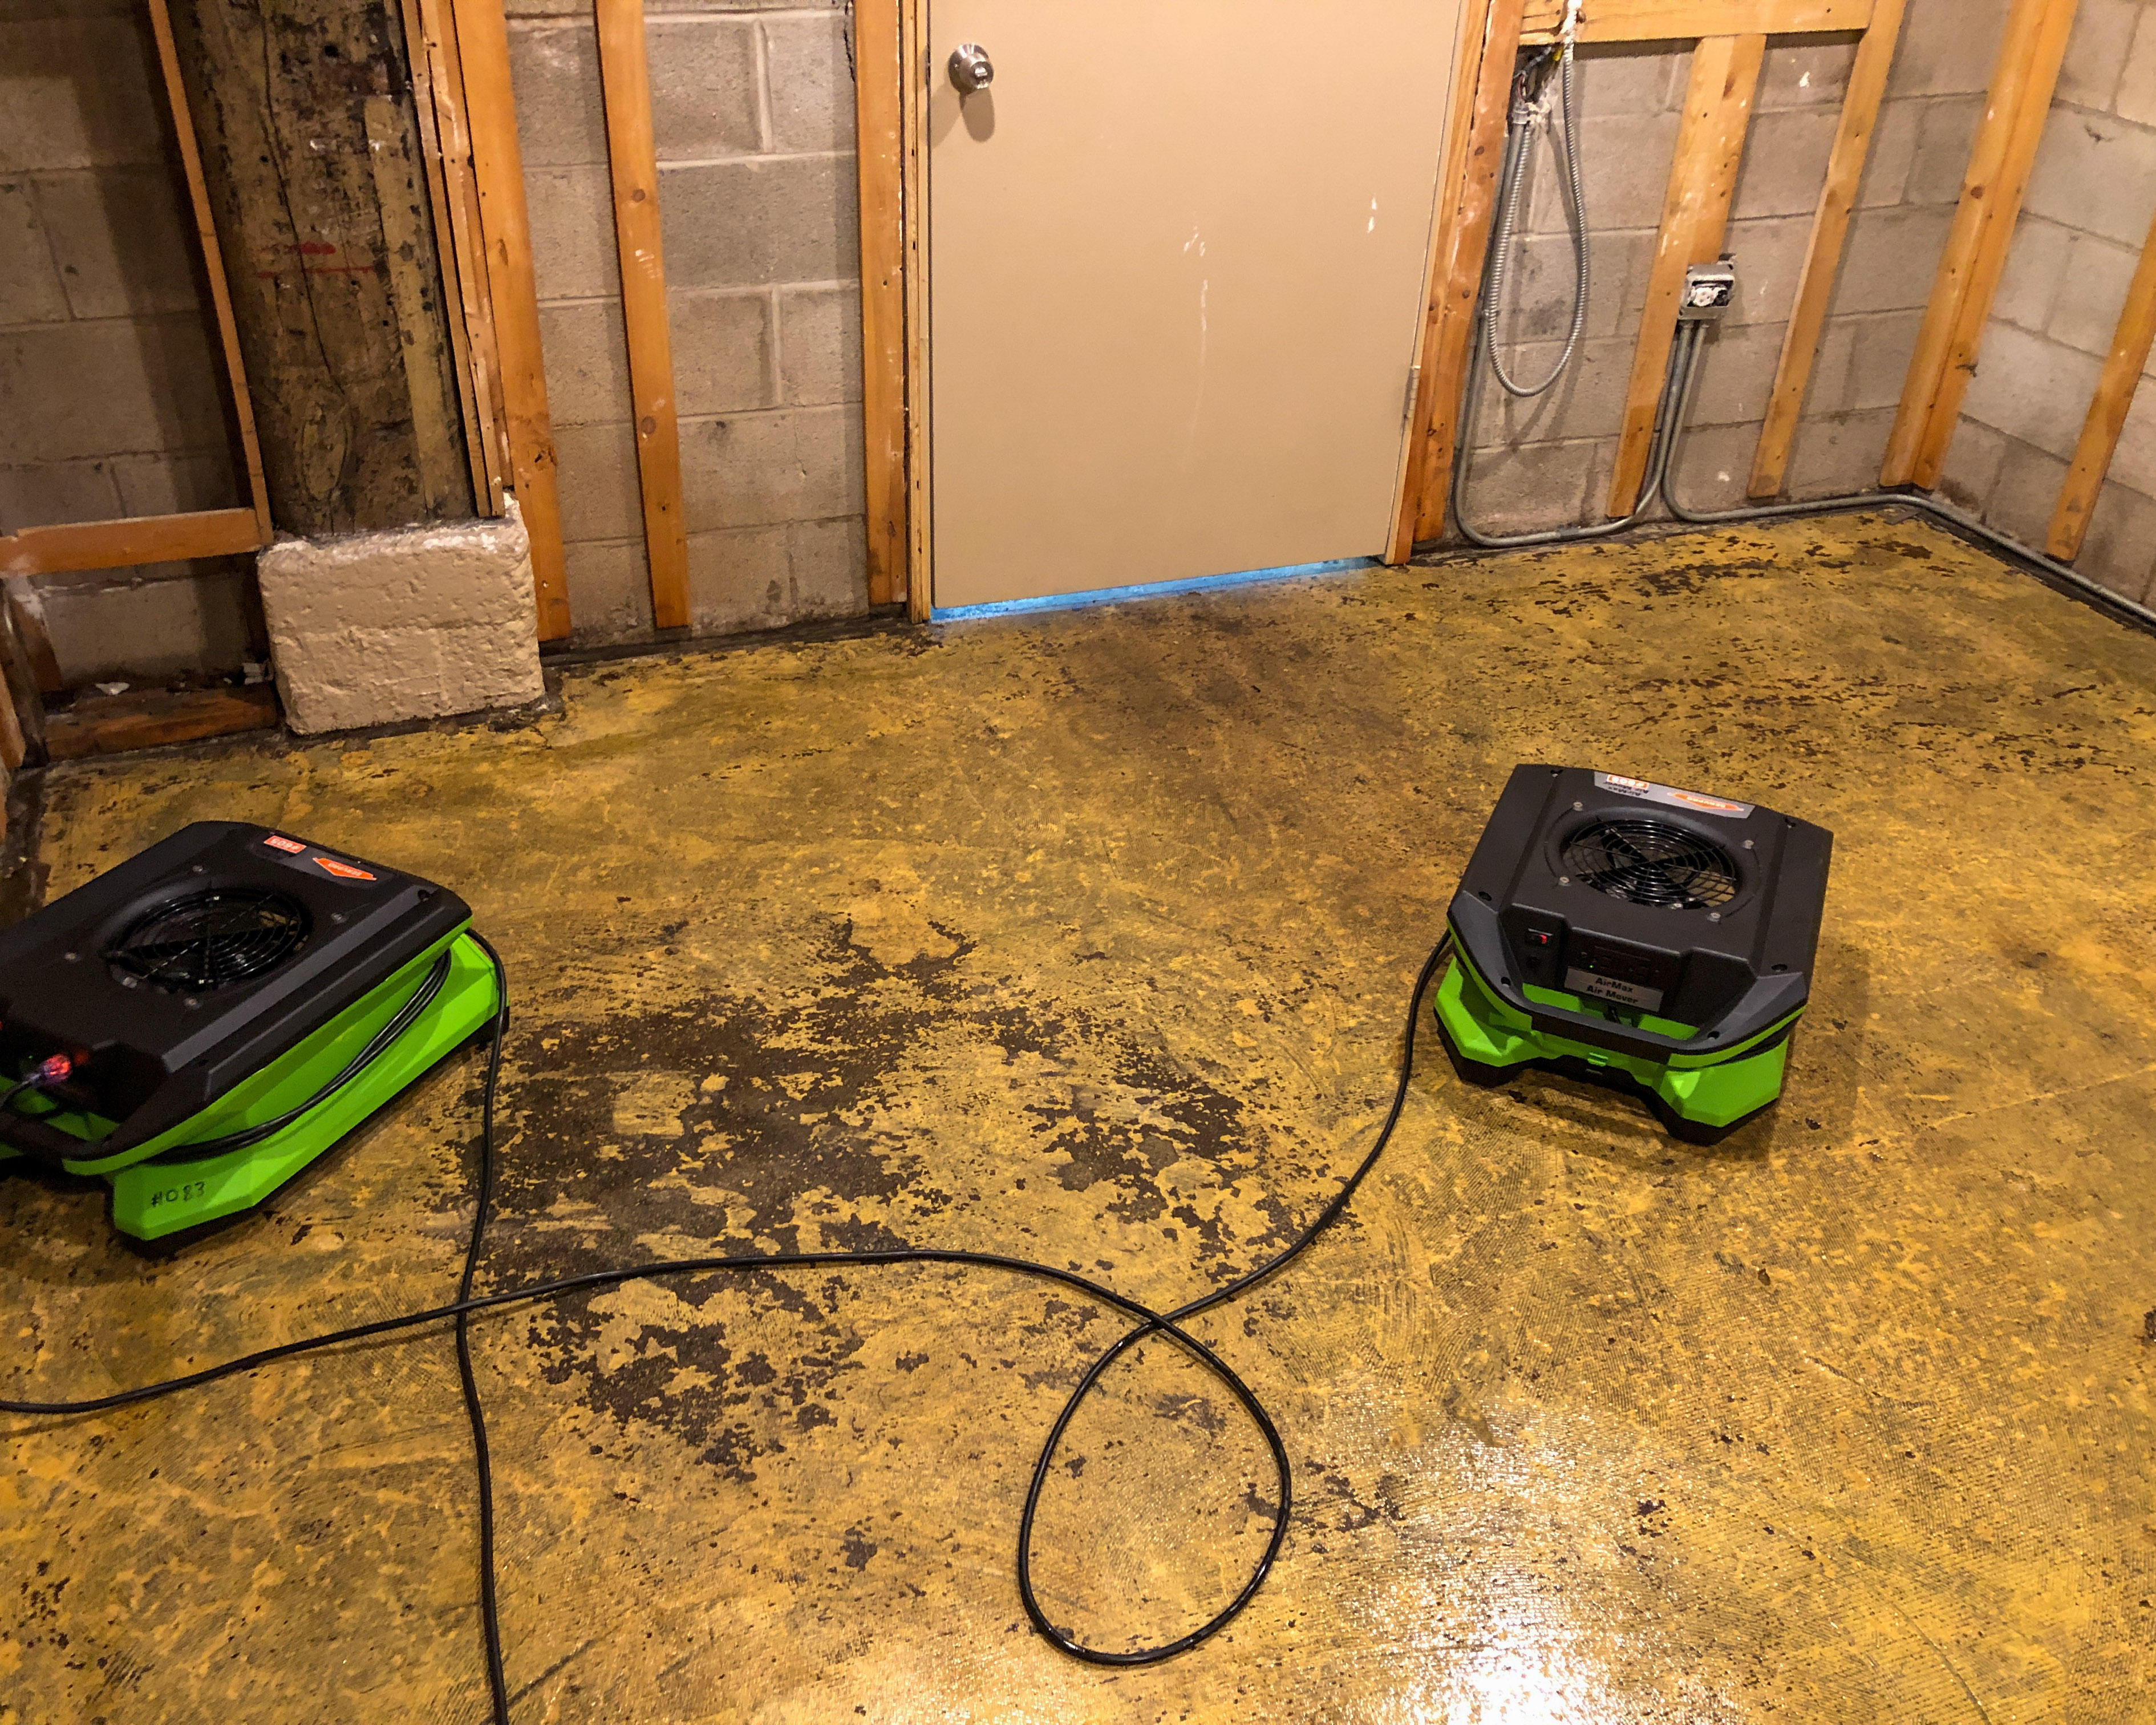 The statistics are staggering, 1/3 of all households in the United States have experienced a water damage event causing damage and even mold growth.